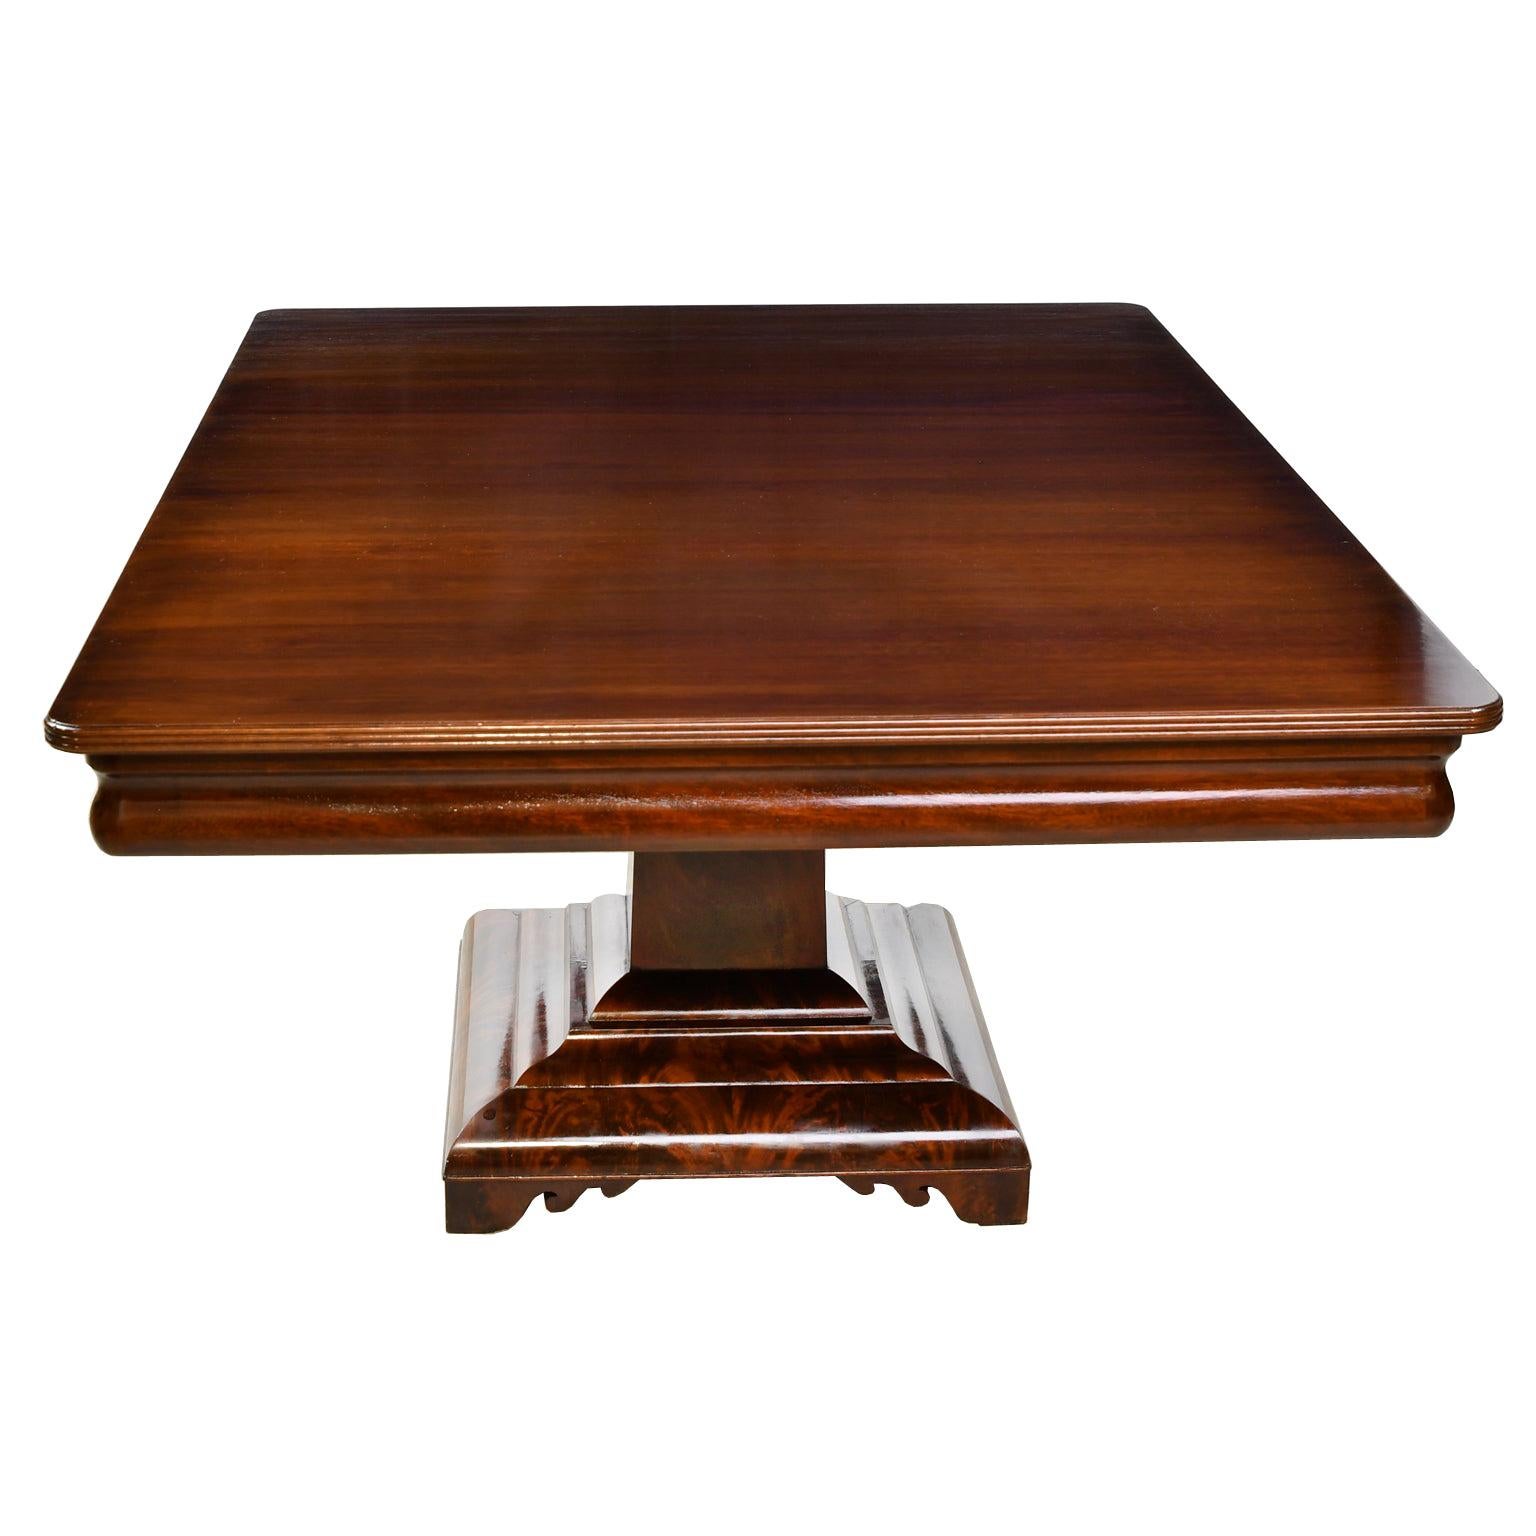 A very handsome dining table with antique classical Grecian-form, stepped pedestal base in figured West Indies mahogany (circa 1825), with a newly-made rectangular top and ogee apron in Honduran mahogany. Table has a French-polish finish. Seats 6